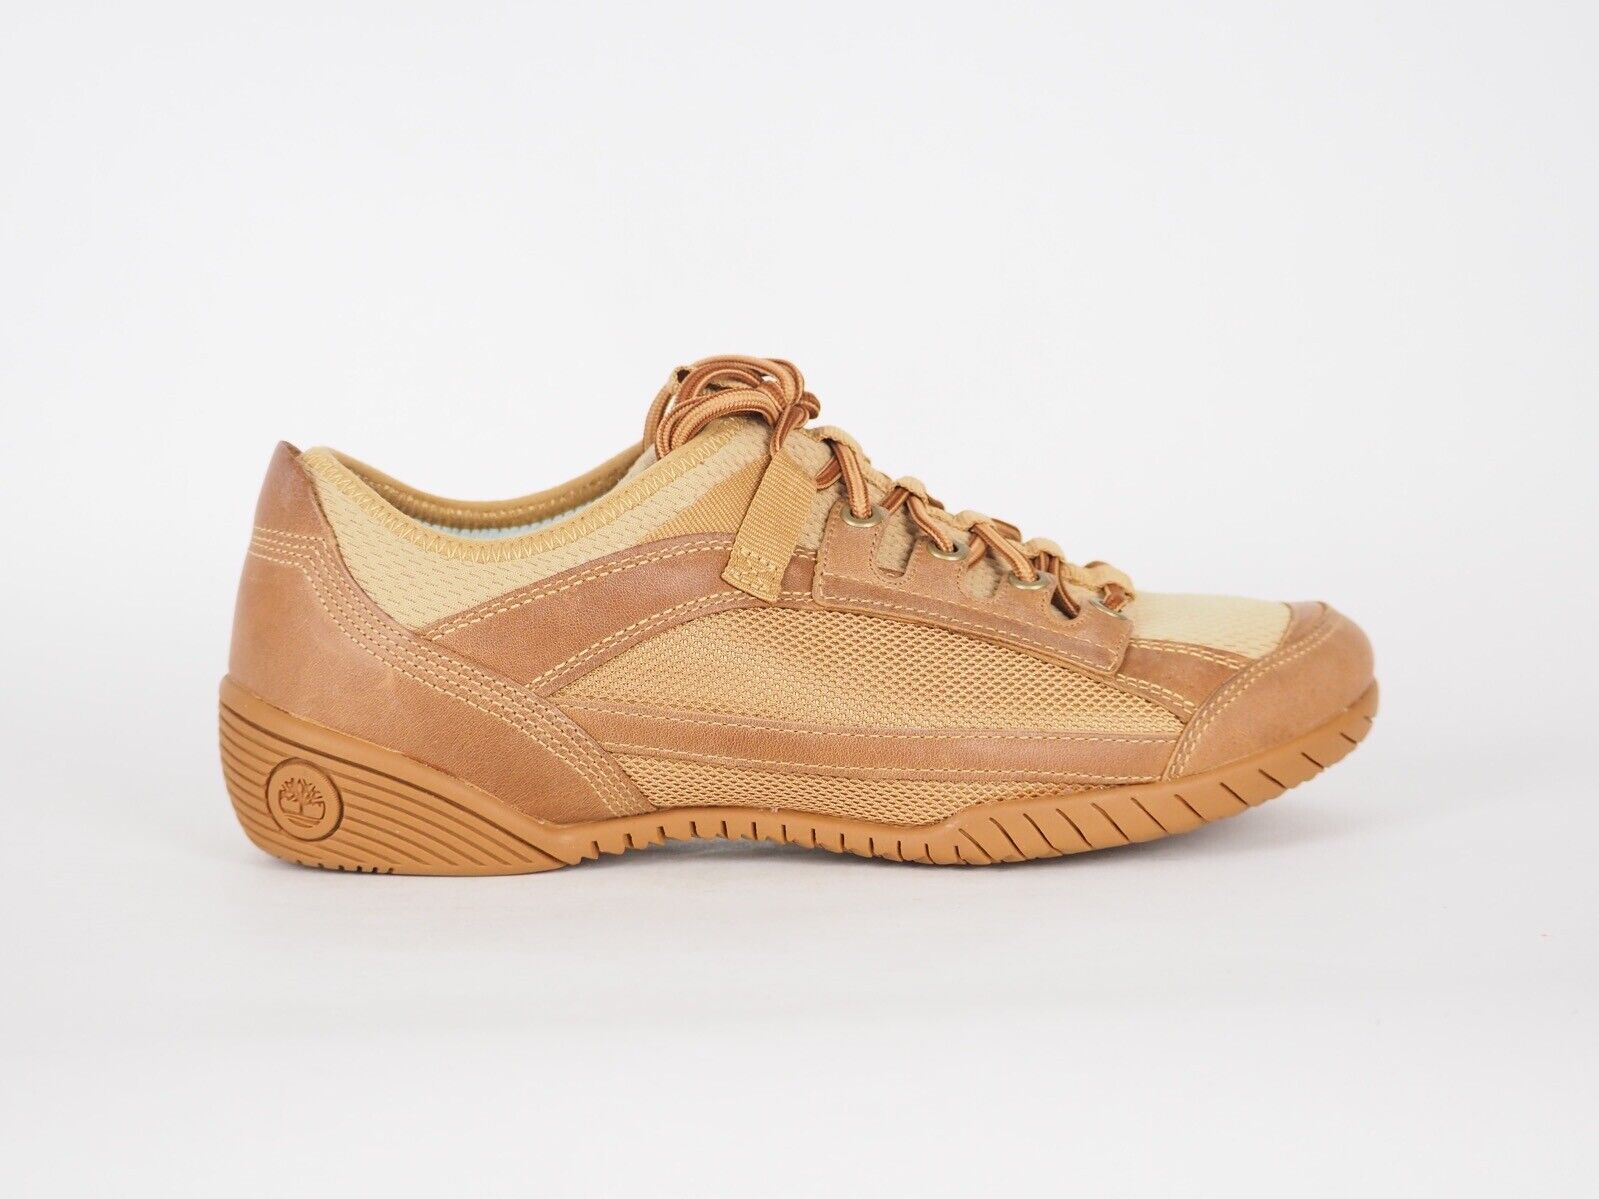 Womens Timberland Richter 25645 Tan Leather Casual Low Trainers Everyday Shoes